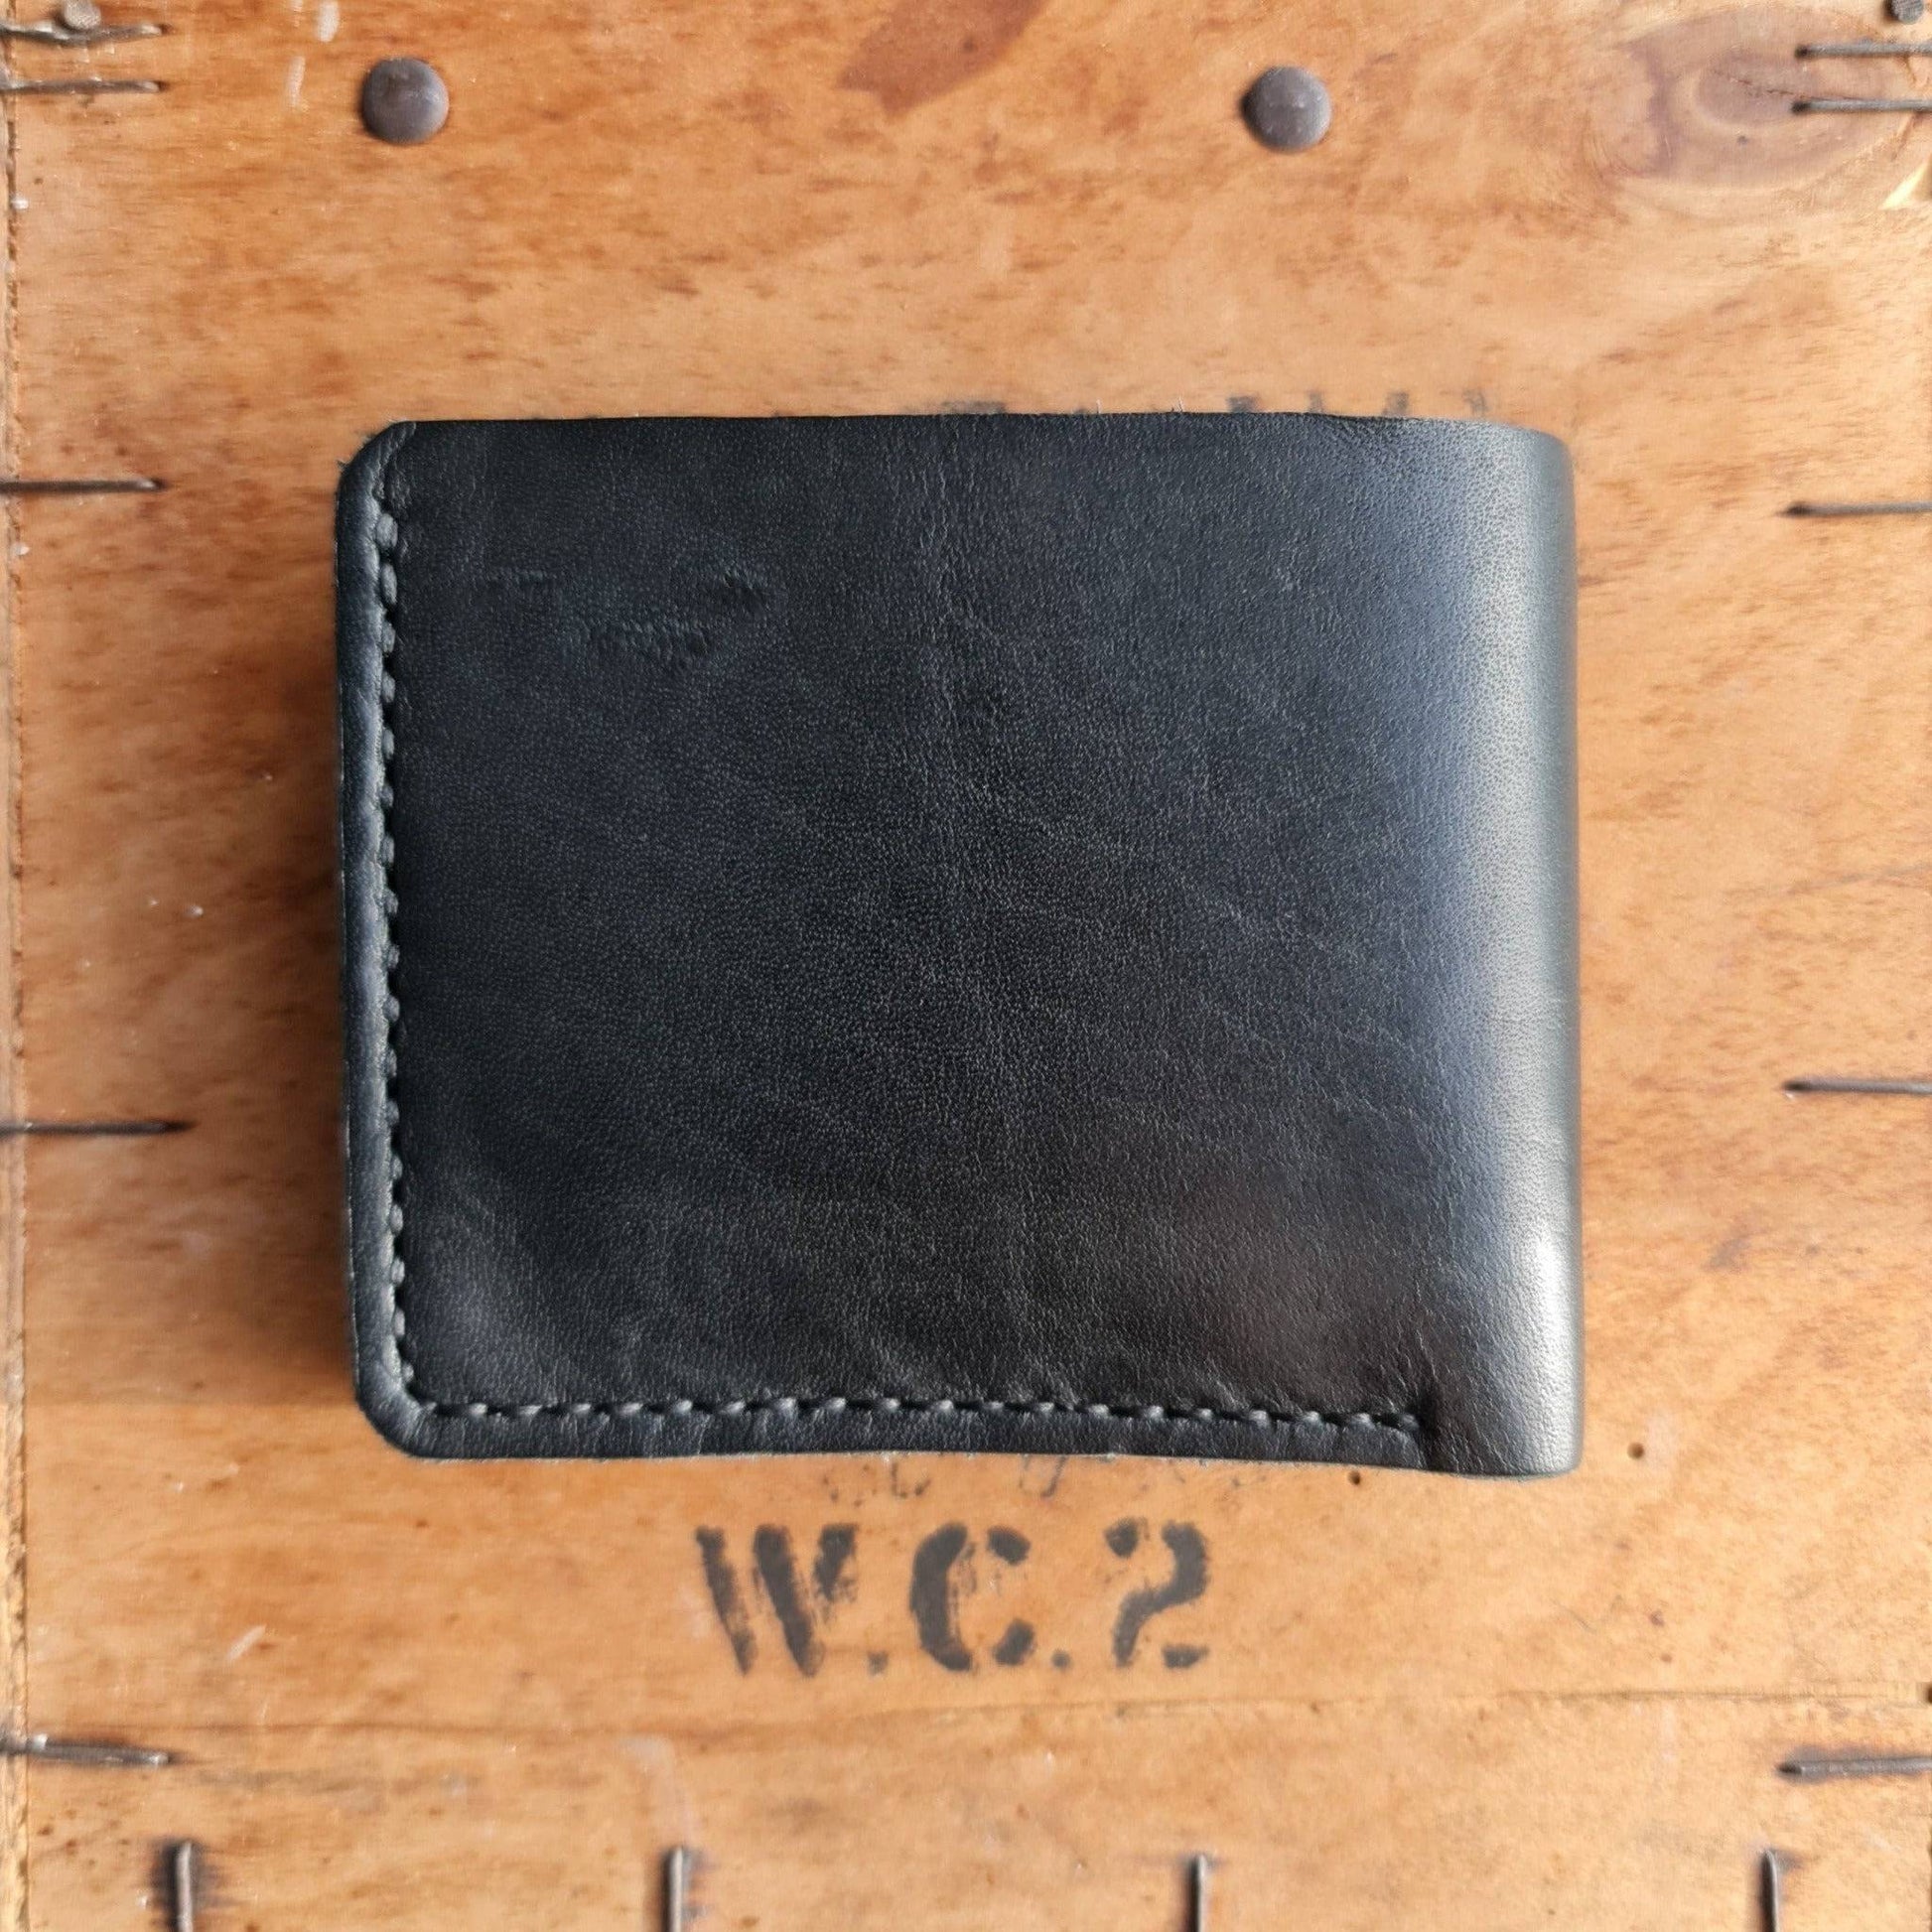 No. 2 Frontiersman Leather Bifold Wallet, Horween Black Dublin Leather, Back